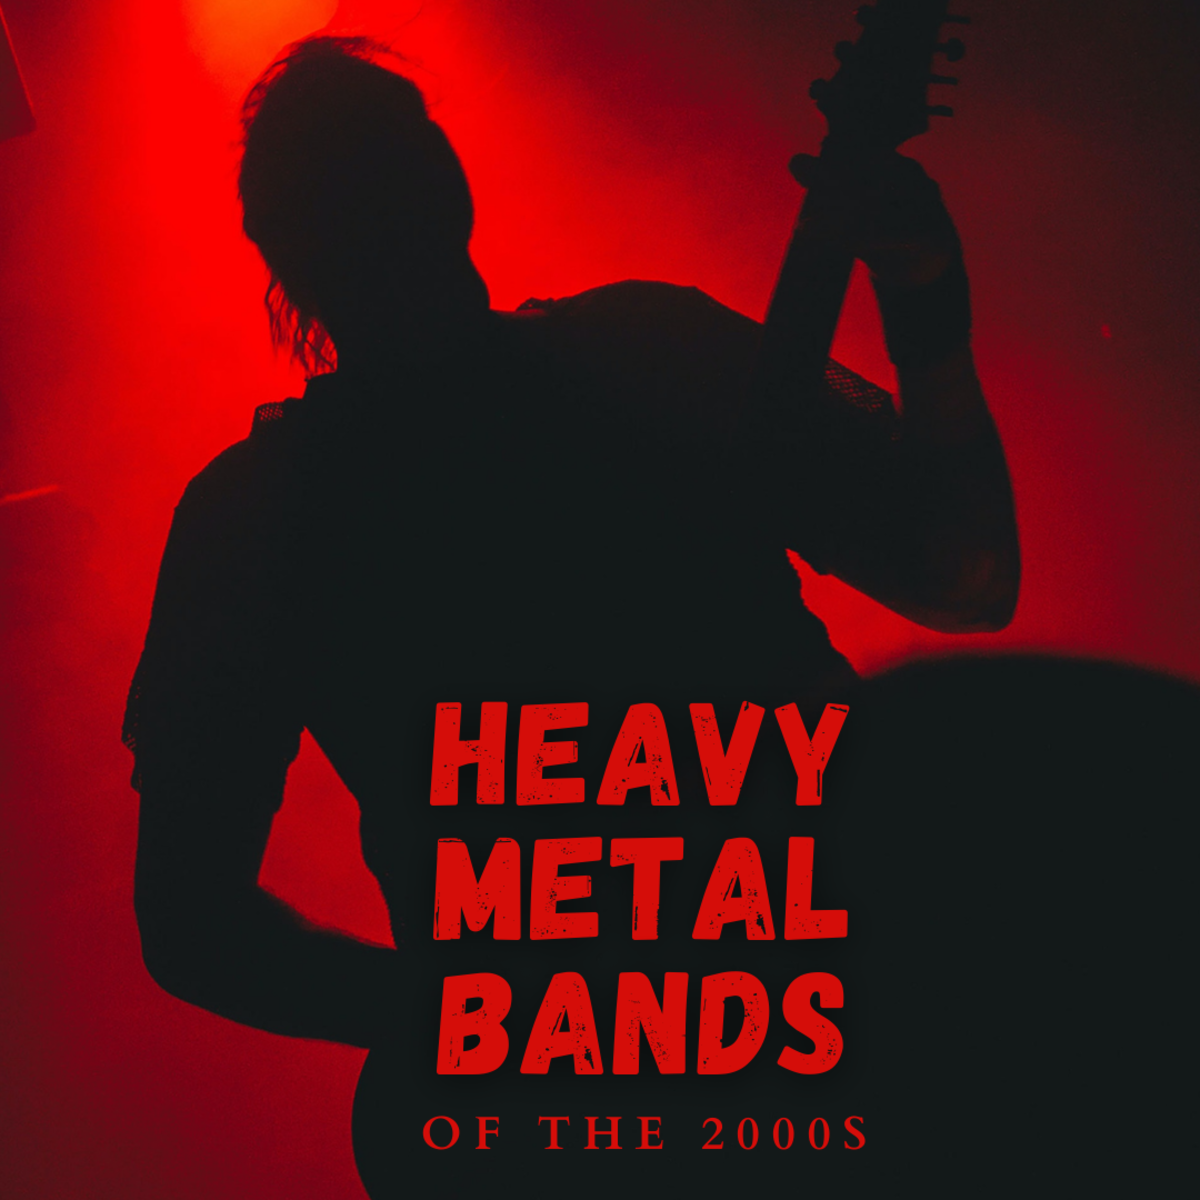 What are the best heavy metal bands of the 2000s? Read on to find out!